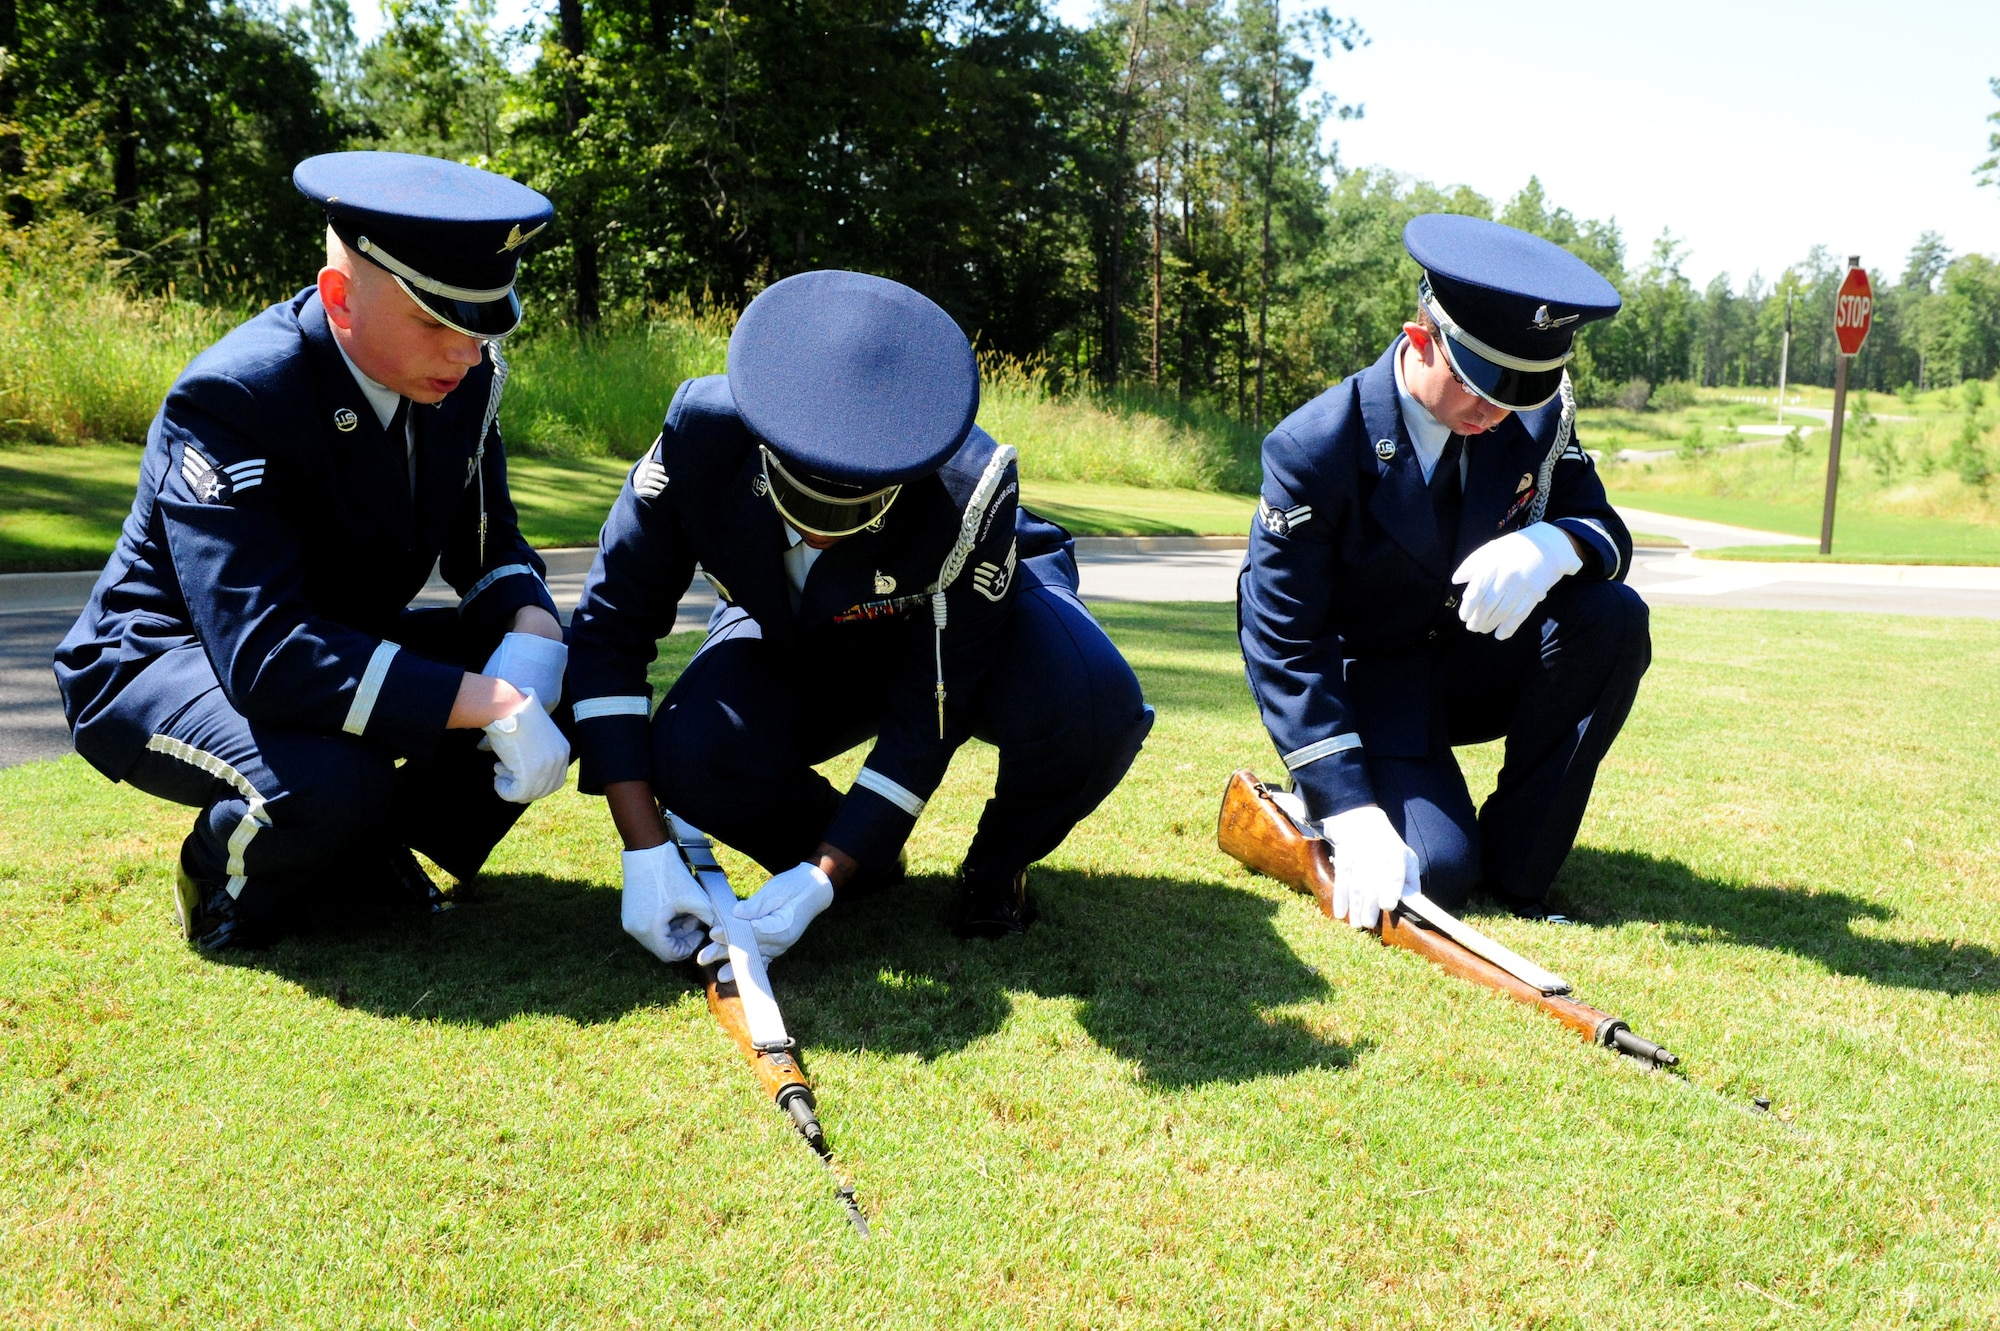 Members of the Maxwell Air Force Base Honor Guard perform a memorial ceremony held Aug. 22, 2012 at the Alabama National Cemetary in Montevallo Ala. Although Mr. was U.S. Naval veteran, Honor Guard Airmen participate in joint service funerals around the globe. (U.S. Air Force photo by Master Sgt. Michael Voss)